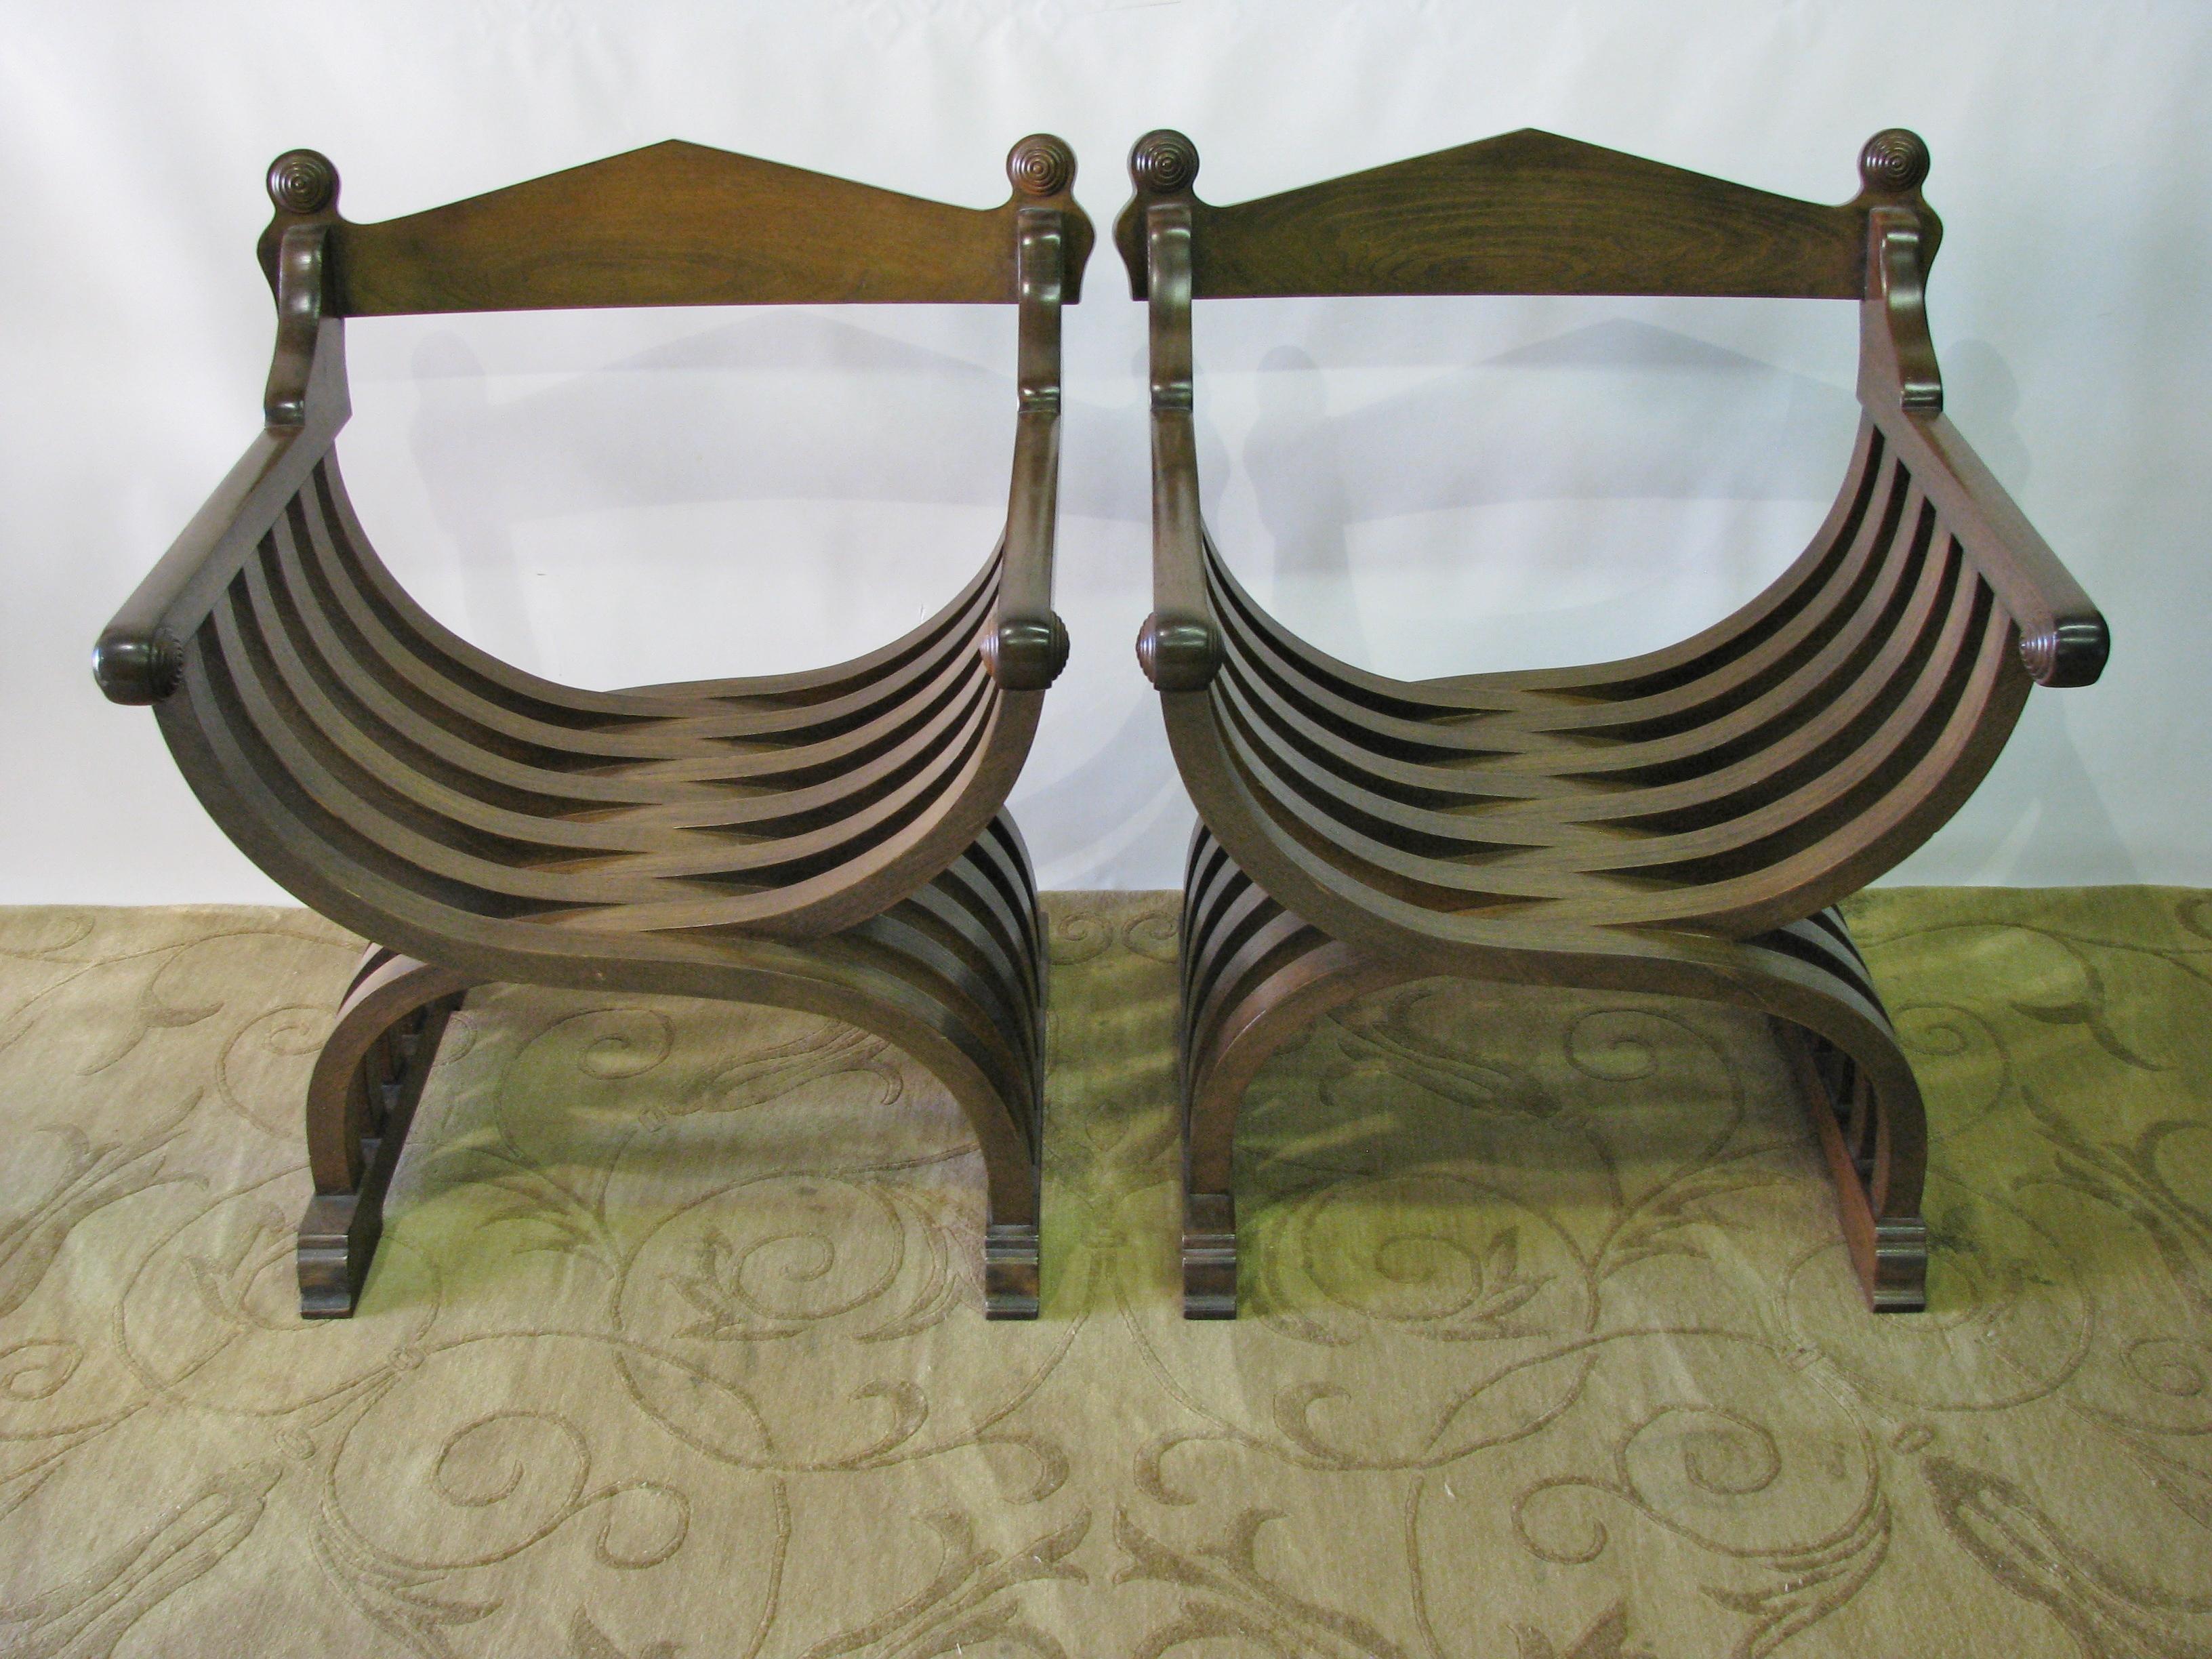 Striking pair of vintage 1960s walnut Savonarola chairs. Beautifully made and generously sized. Each has a separate cream upholstered cushion. Turned details on the back crest and arms. Medium-dark color and satin finish. Great looking from all